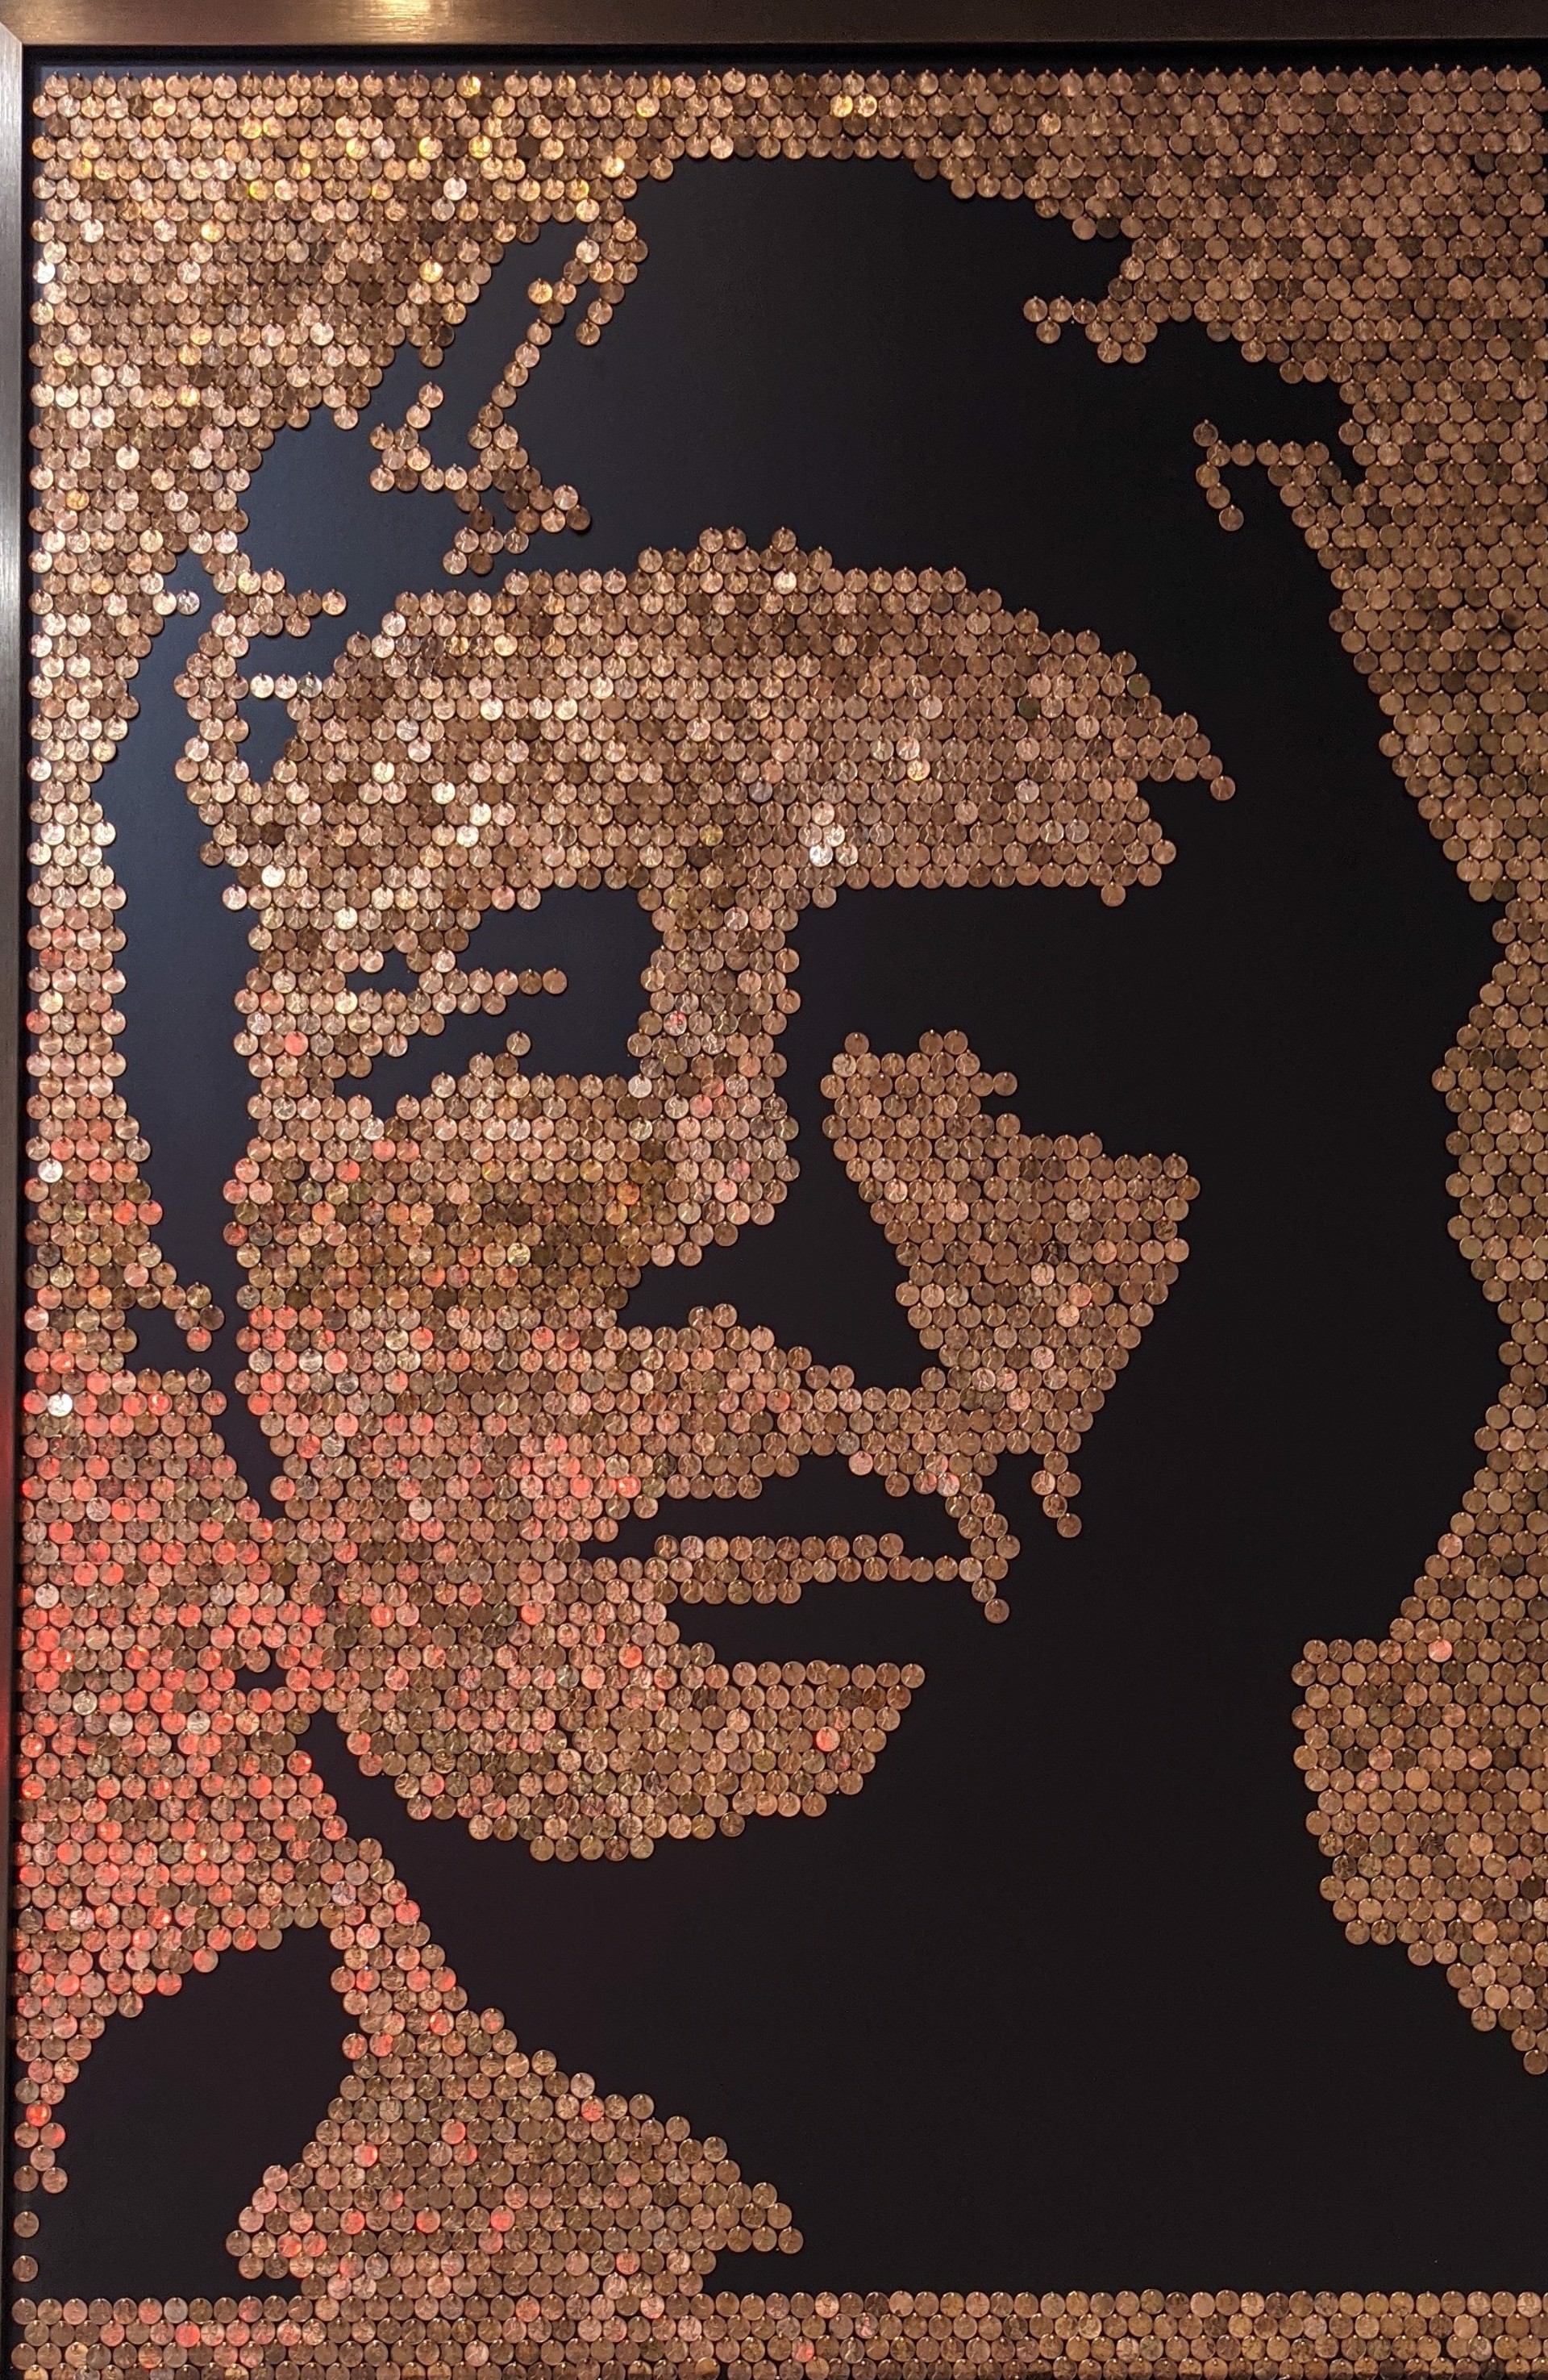 Penny Face "James Dean" by Coins & Sequins On Canvas by Efi Mashiah